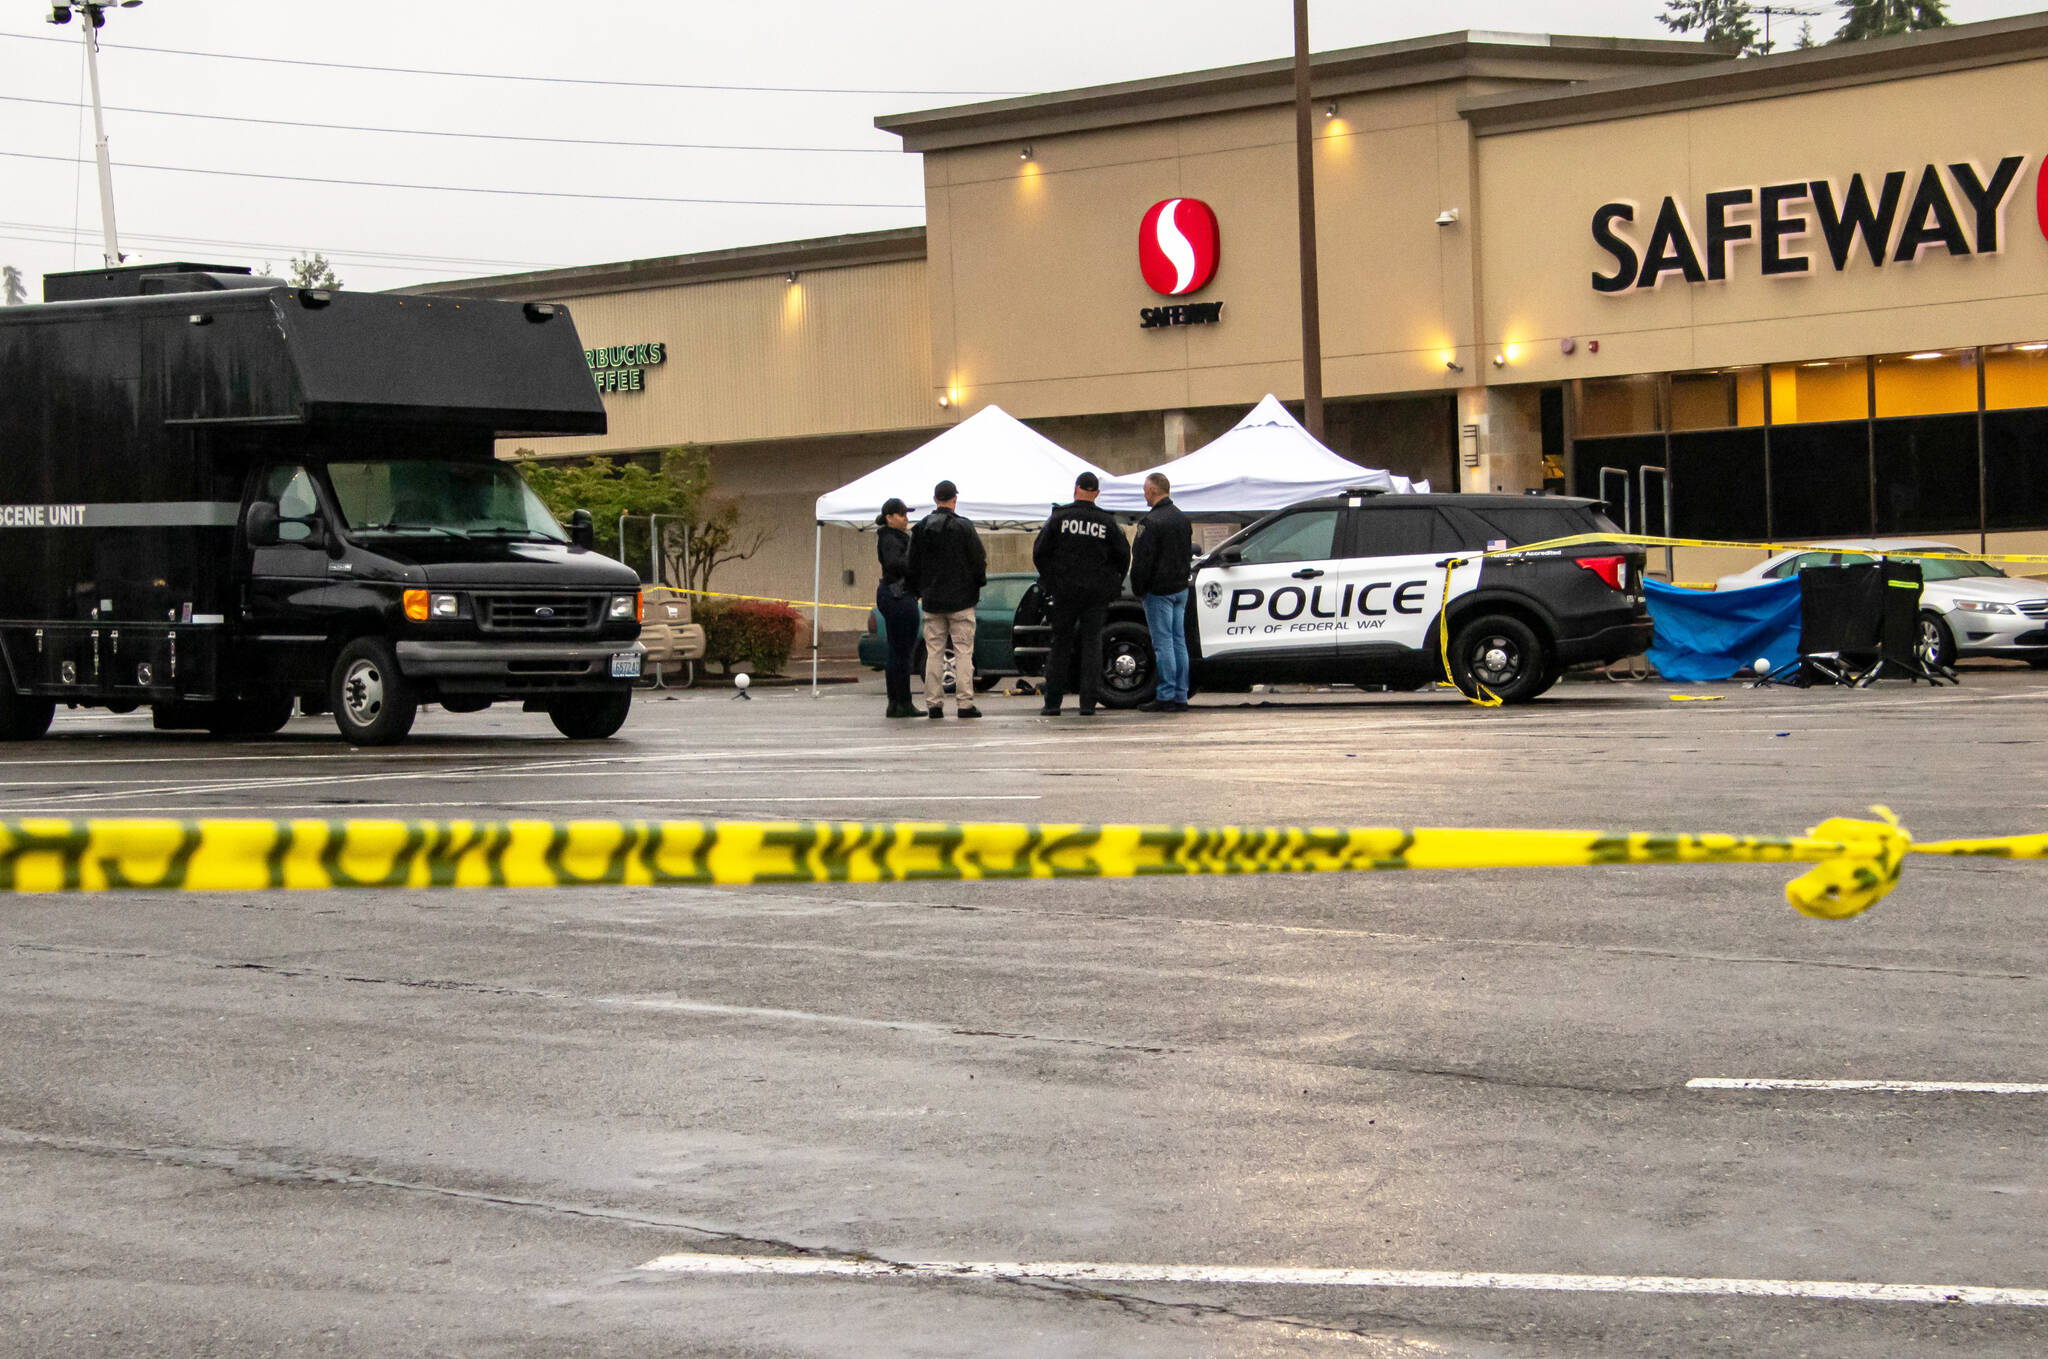 Federal Way Police found several cartridge casings in the Twin Lakes Safeway parking lot on June 17 after the fatal shooting. COURTESY PHOTO, South Sound News